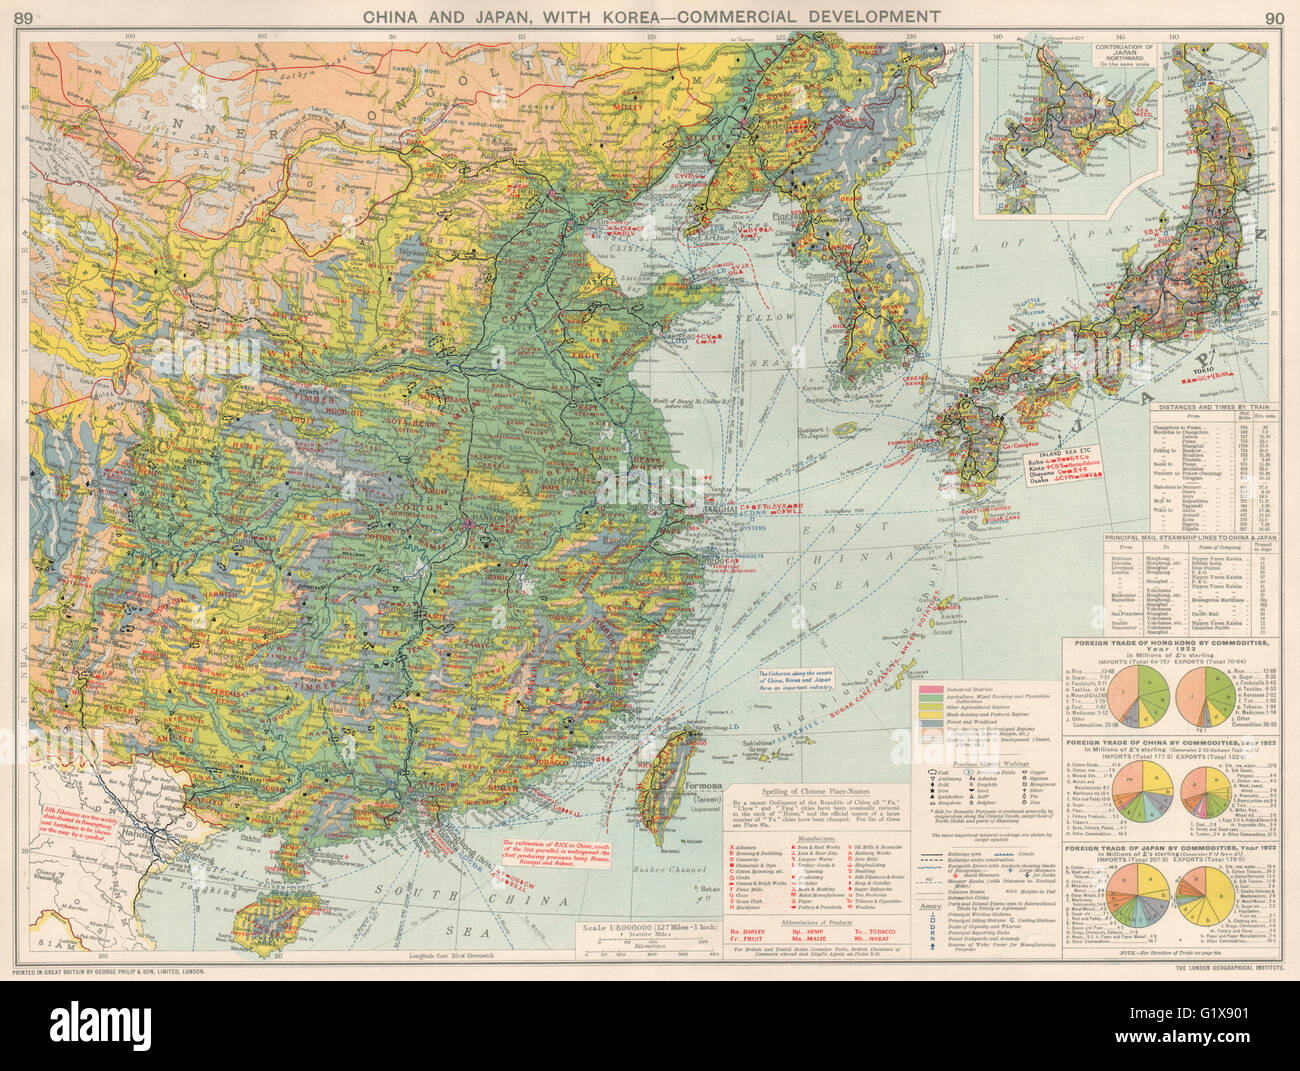 East Asia China Japan Korea. Manufacturing Minerals Mining Agricultural 1925 map Stock Photo